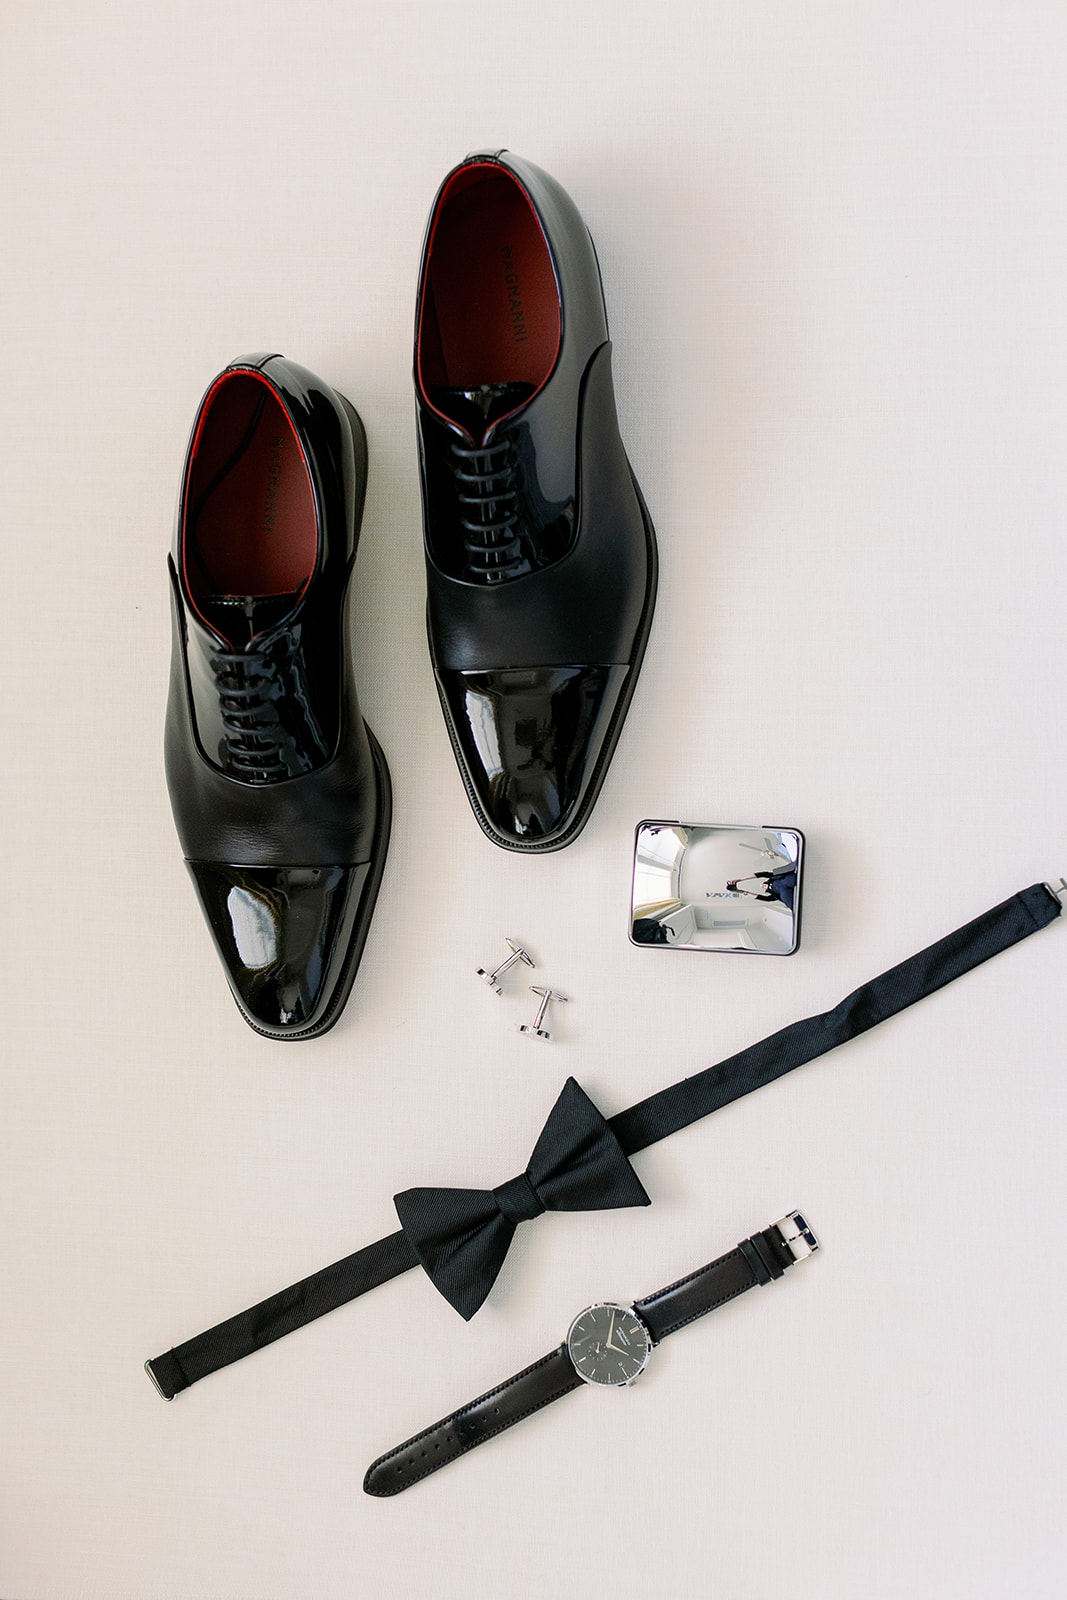 Groom wedding detail flat lay with Manolo Blahnik shoes, cufflinks, cologne, a black bowtie and watch. 